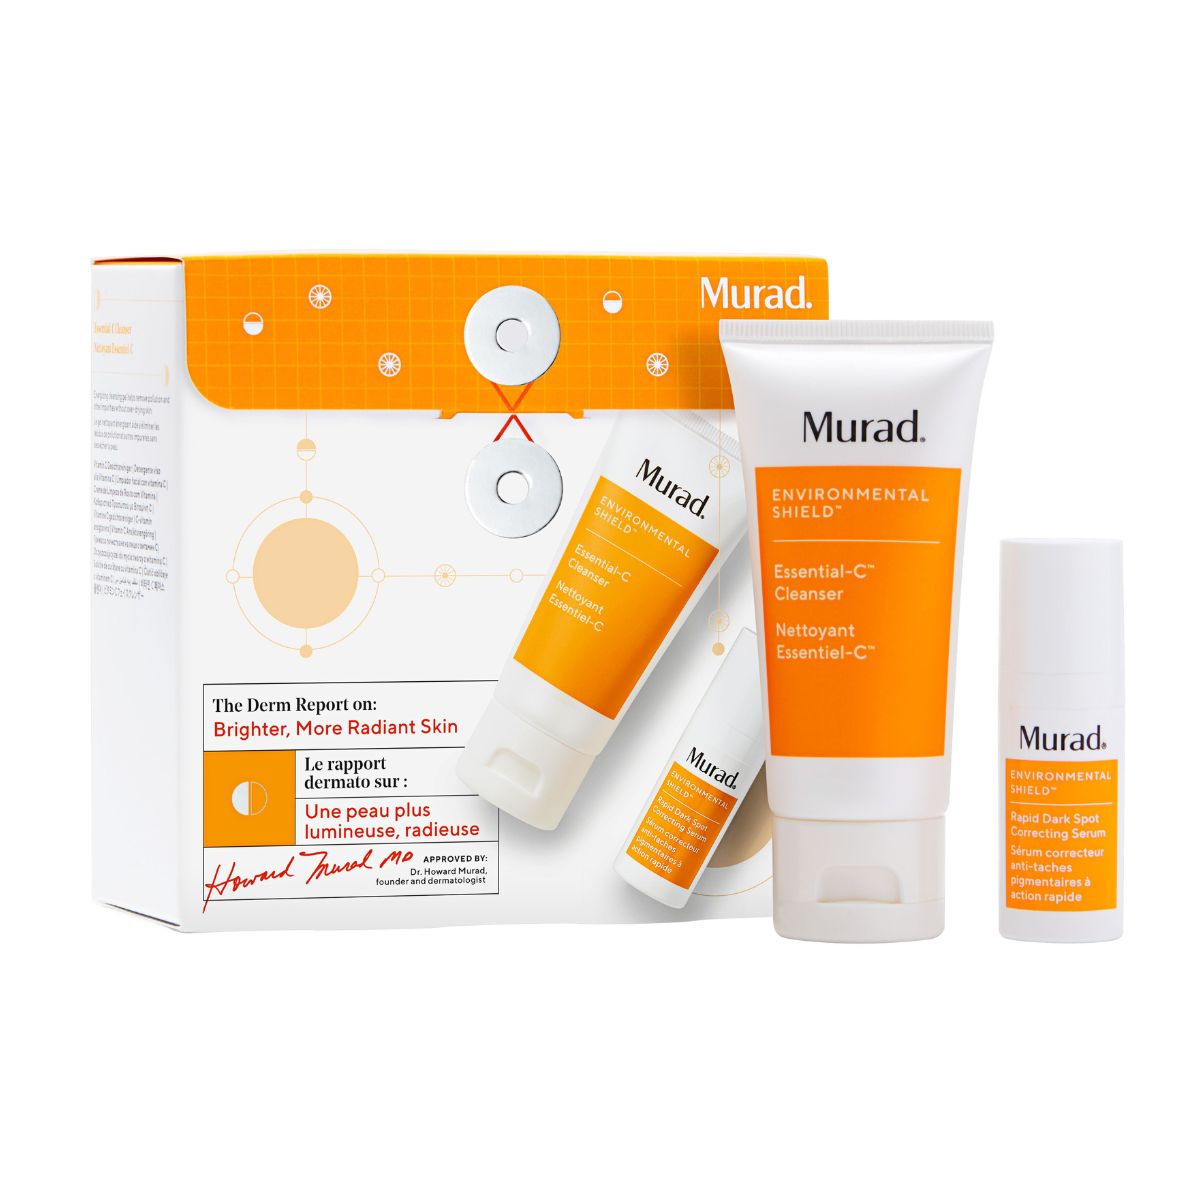 Murad The Derm Report on: Brighter, More Radiant Skin.